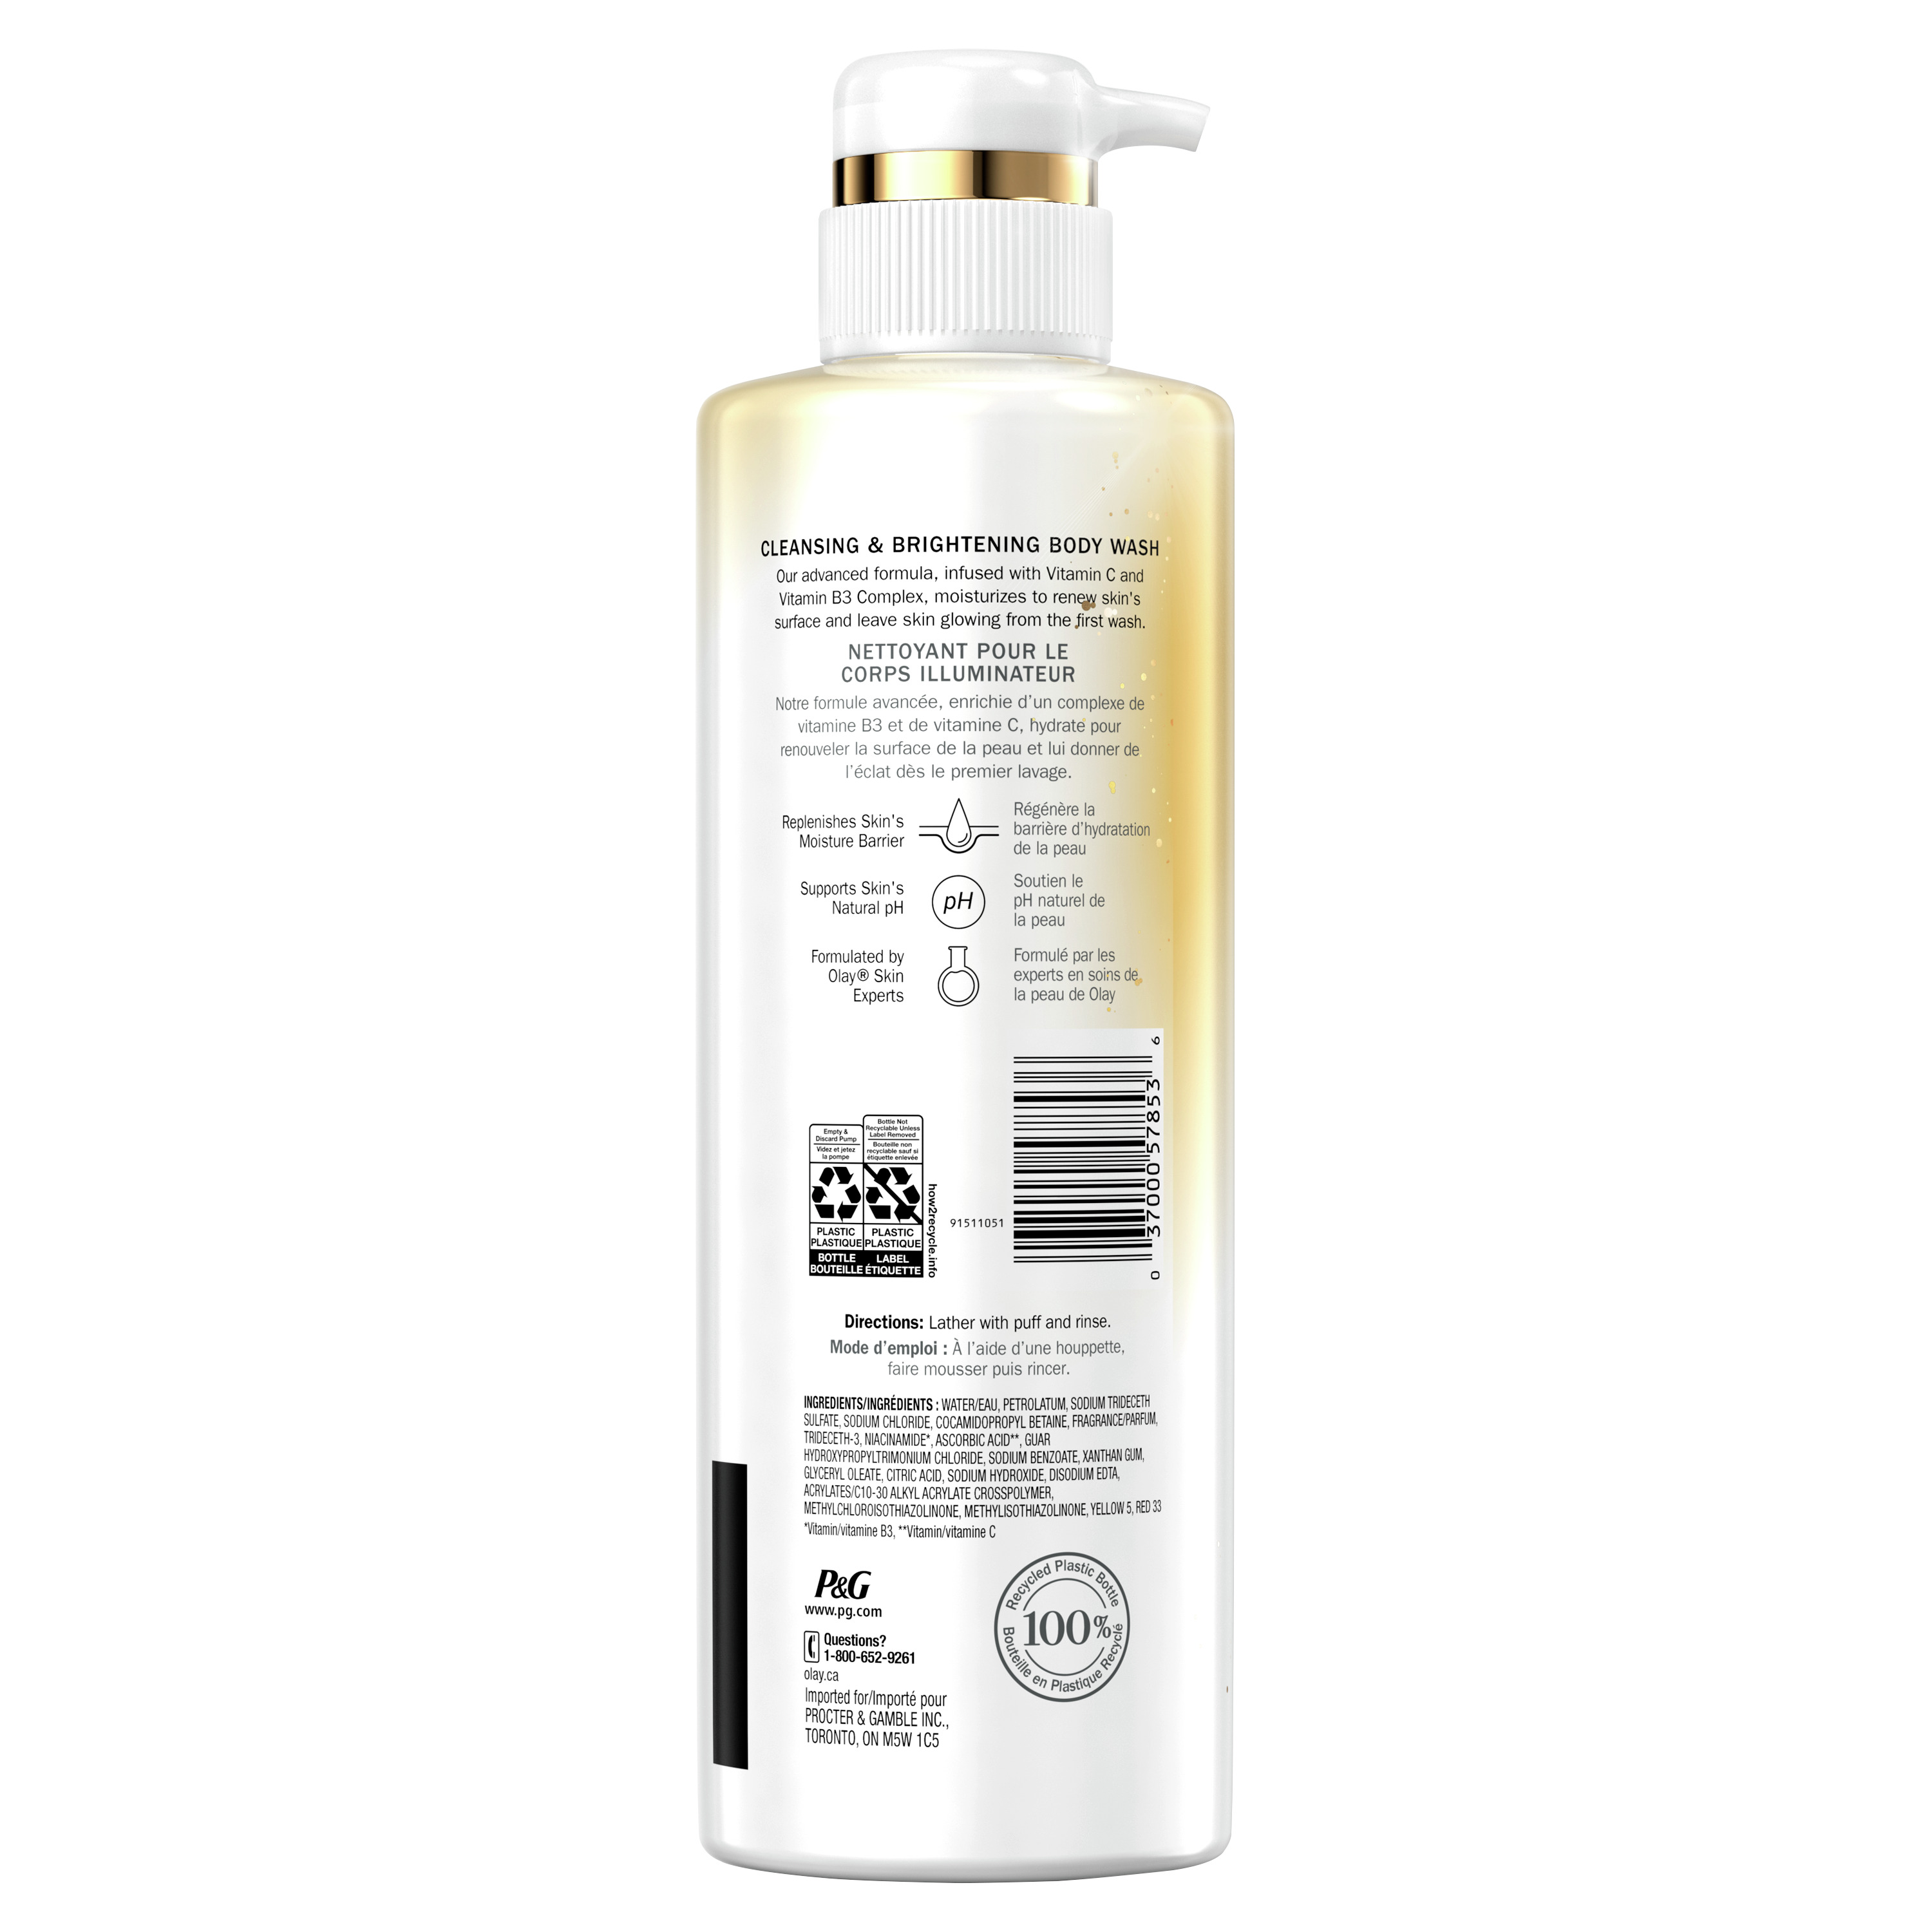 Olay Cleansing & Brightening Body Wash with Vitamin C and Vitamin B3 - 2